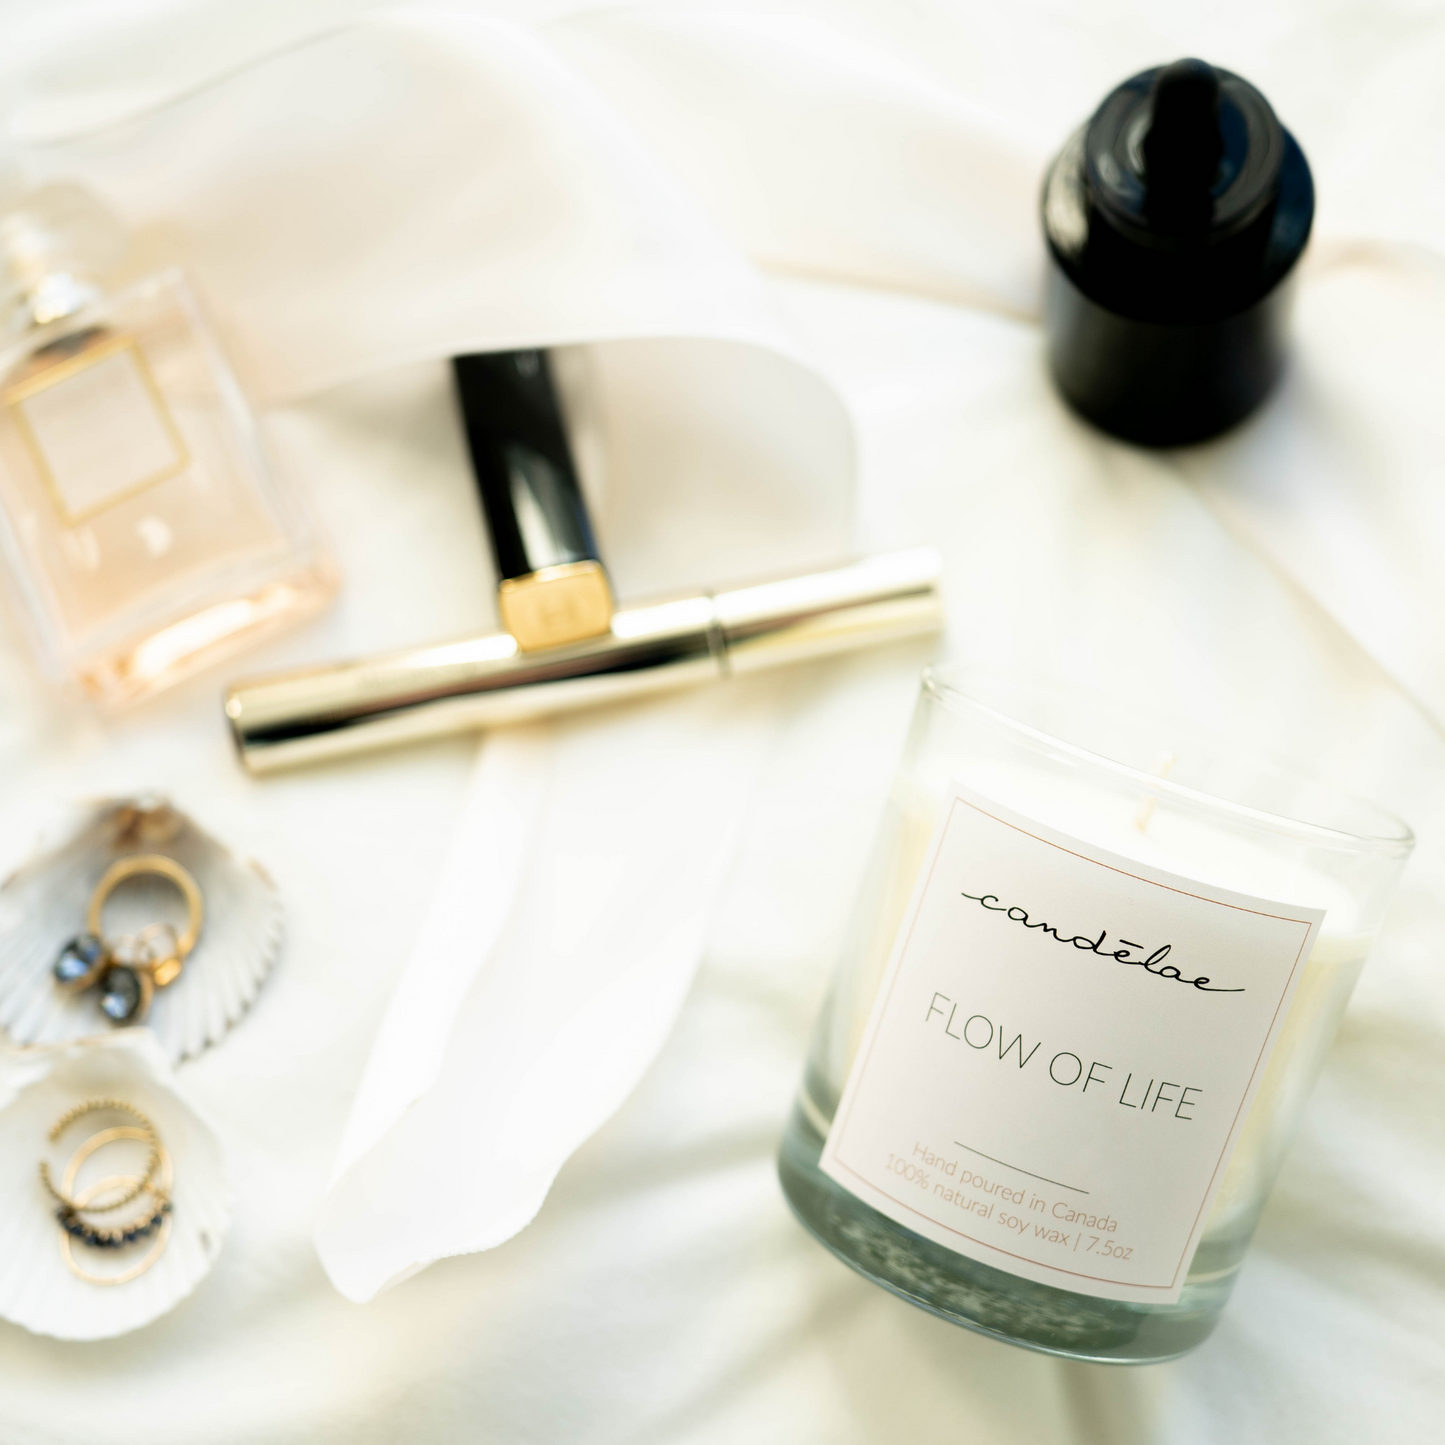 Flow of Life scented candle with essential oils is set on the bed around beautiful rings, earrings